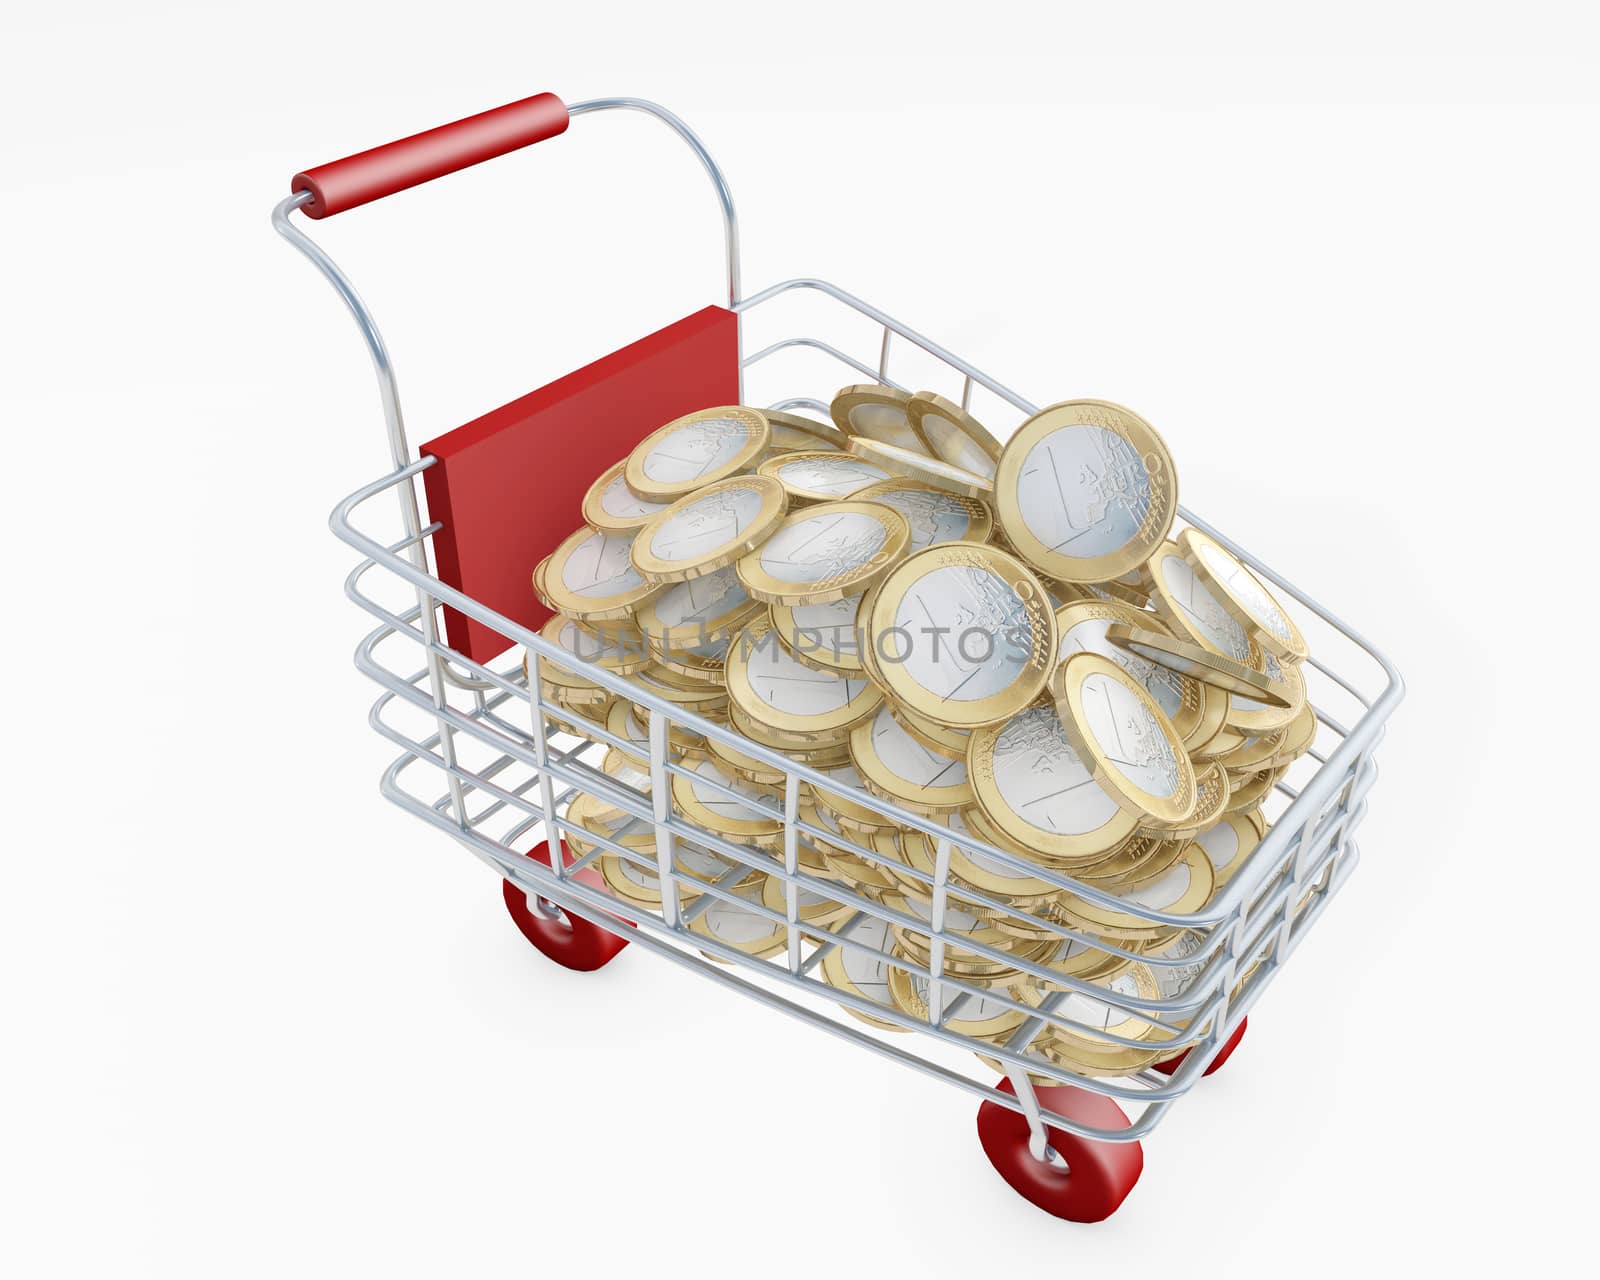 Shopping cart full of euros expensive shipping concept 3d render by F1b0nacci